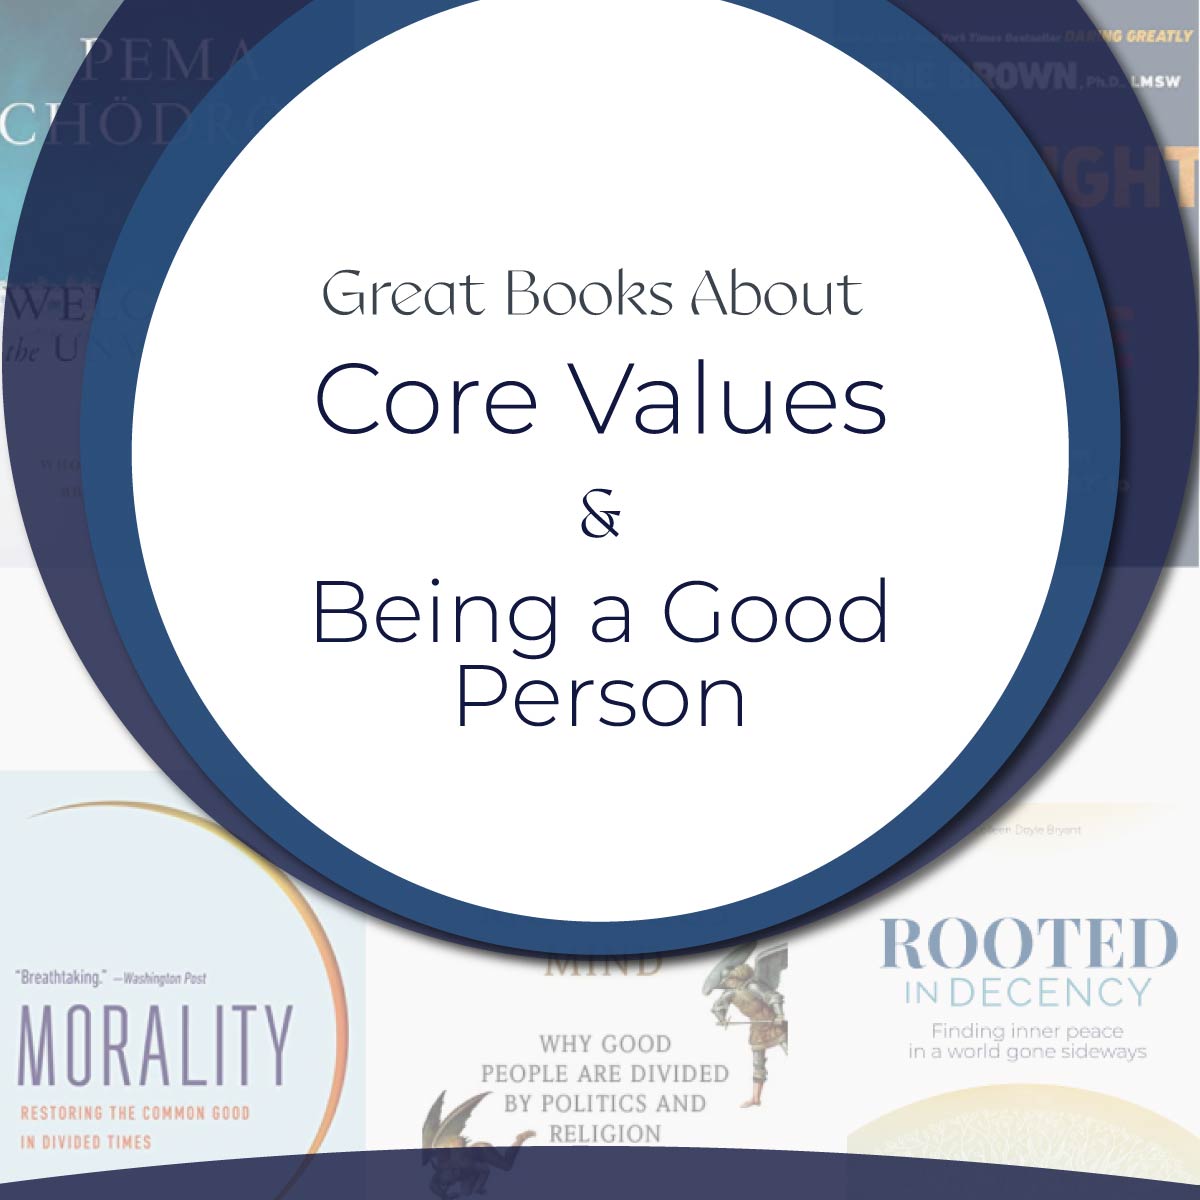 Books about core values and being a good person